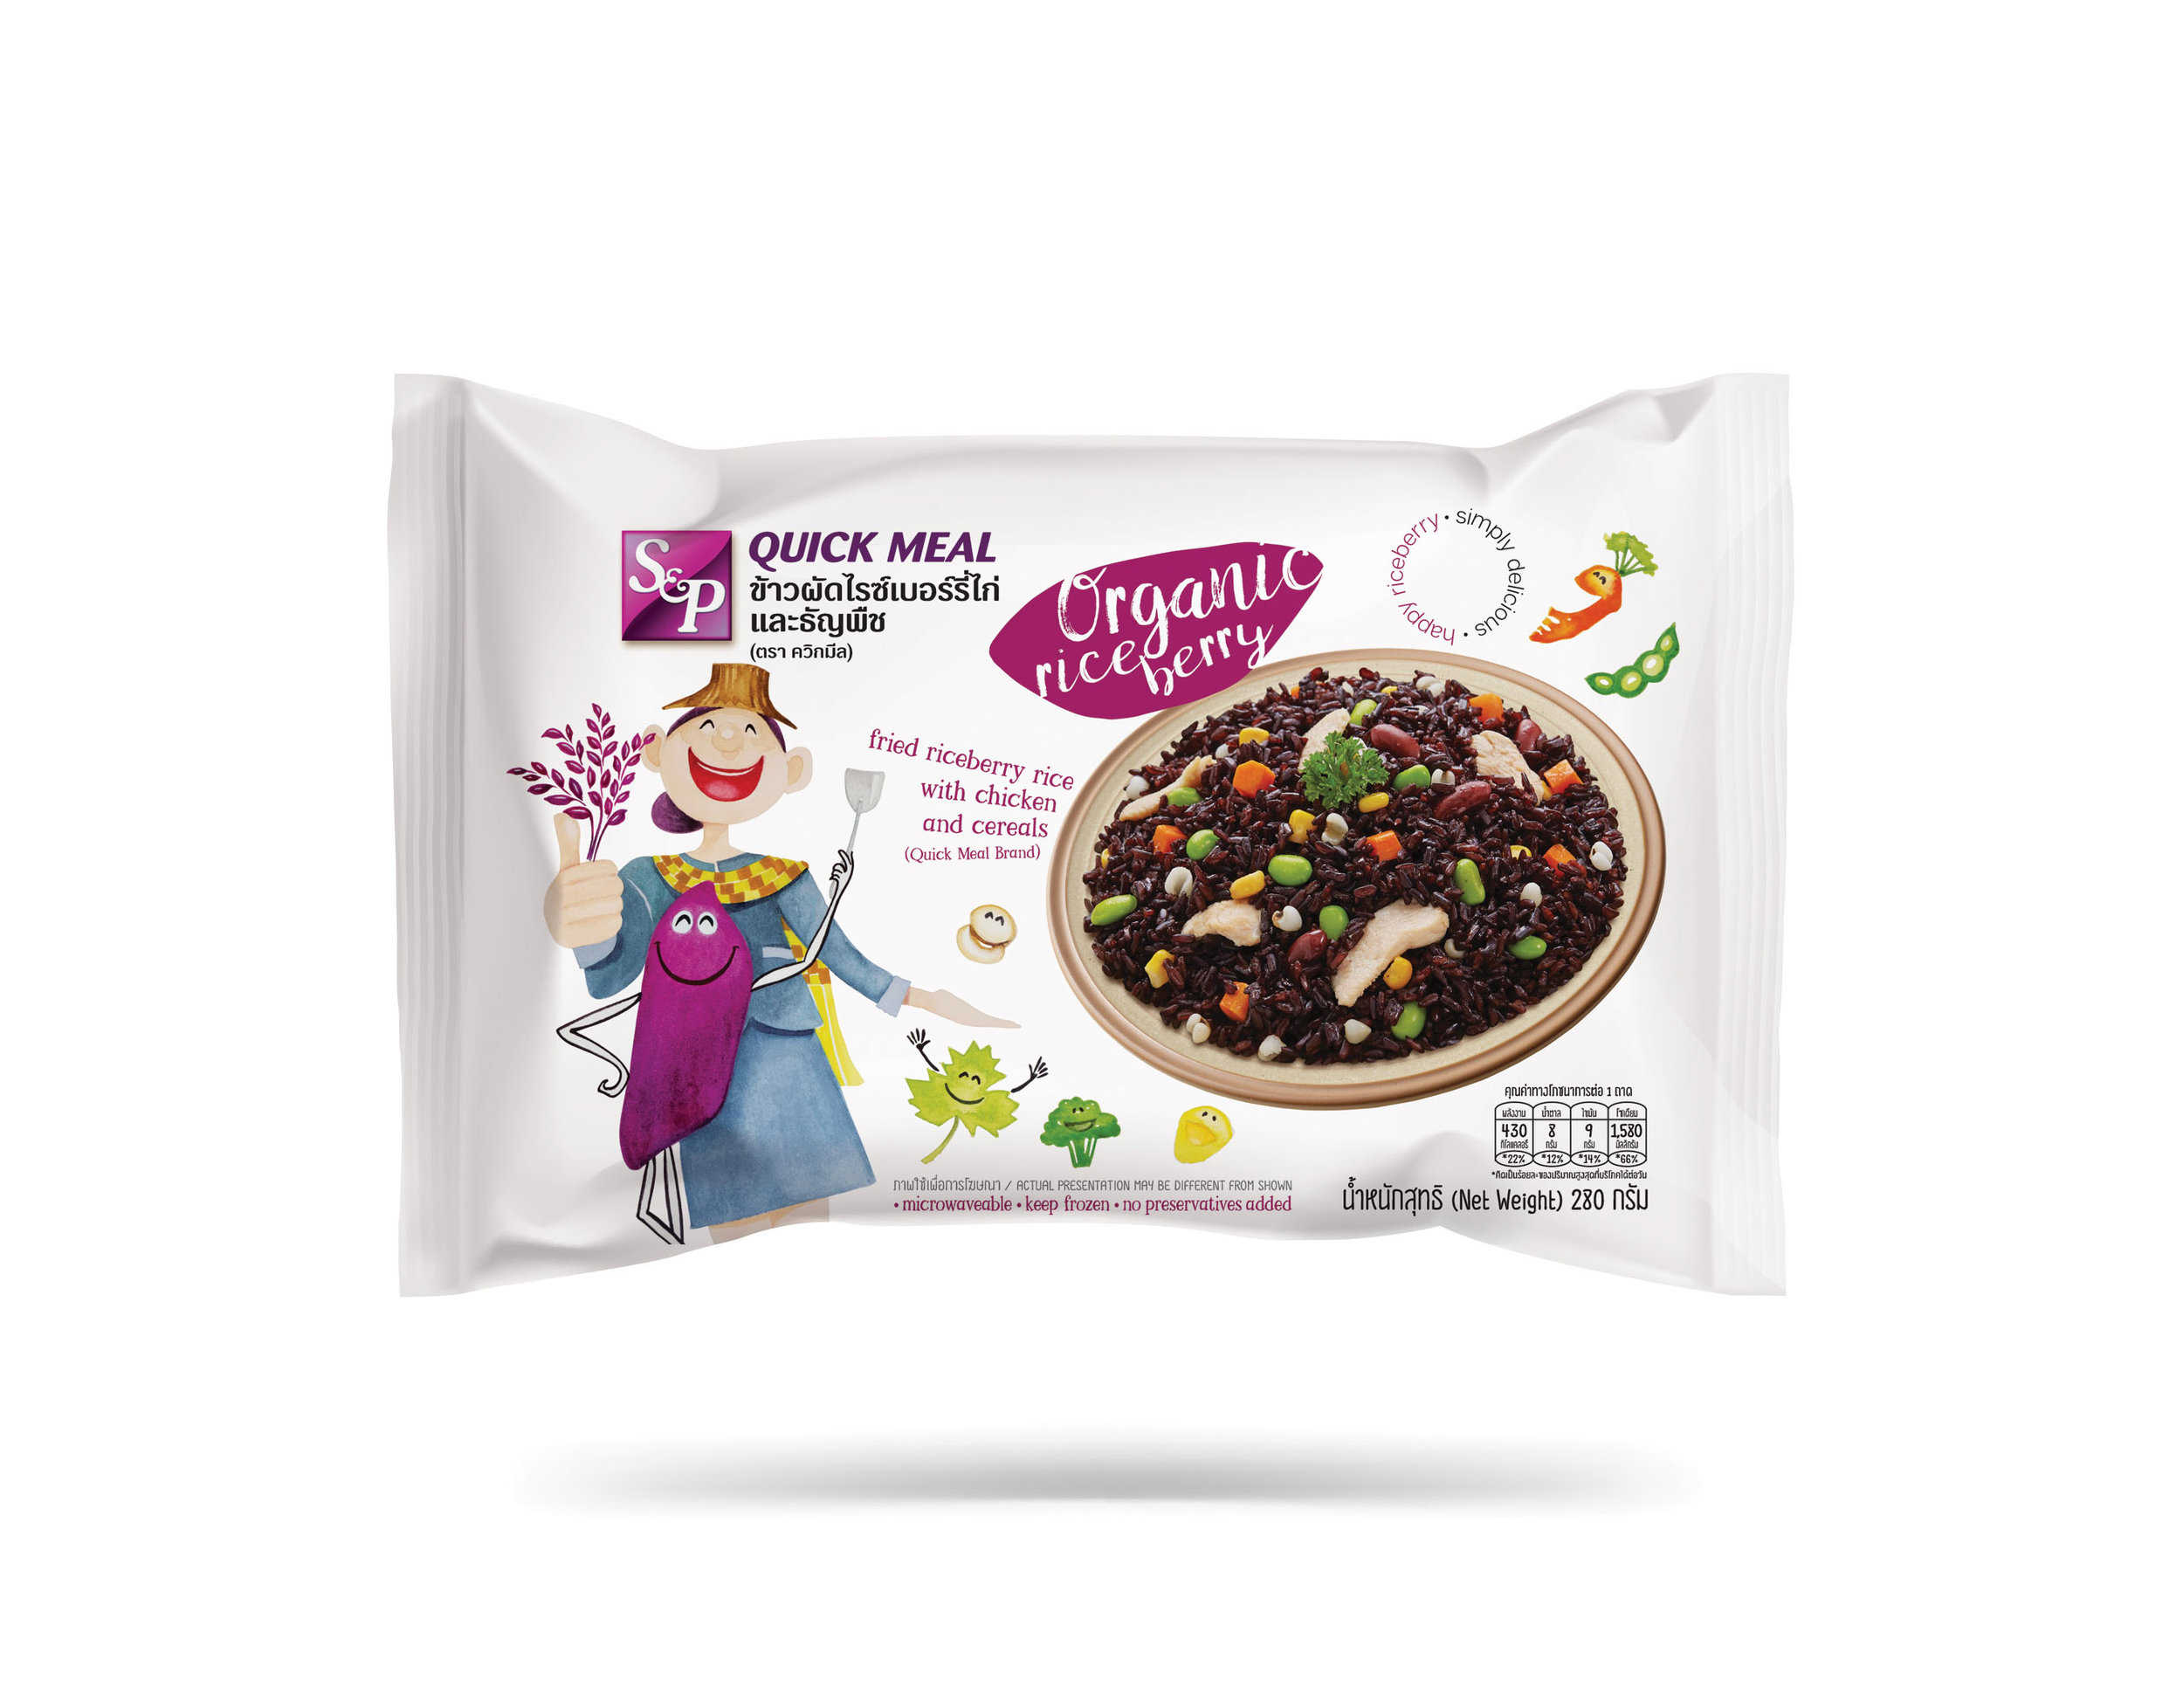 Packaging Design for Organic Frozen Food Brand from Thailand